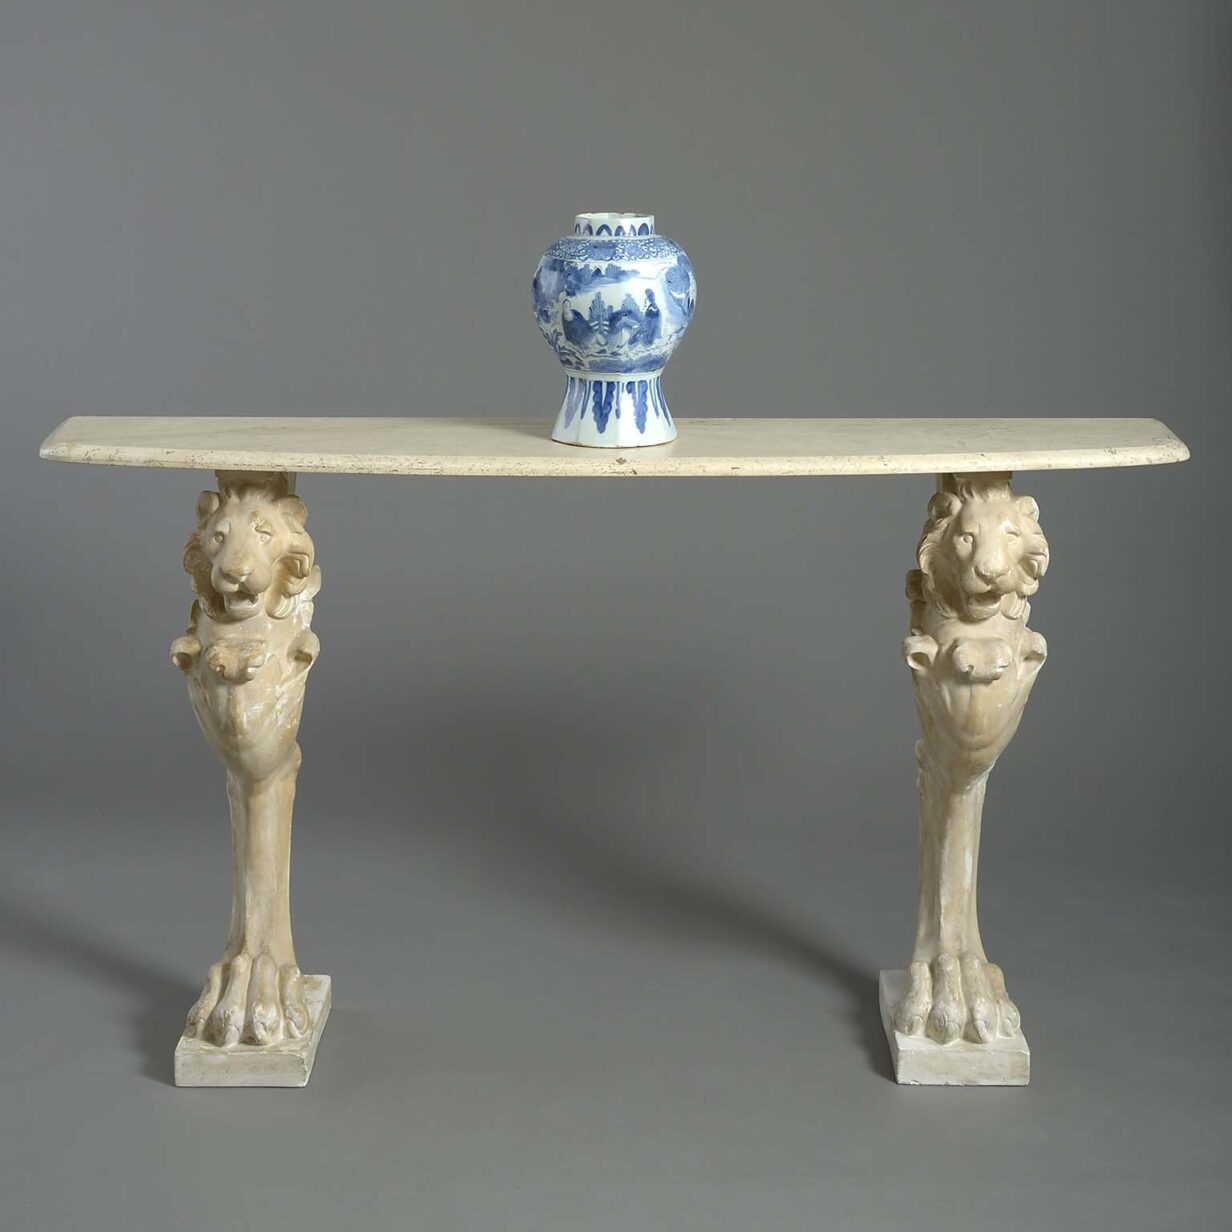 Mid-century neo-classical console table